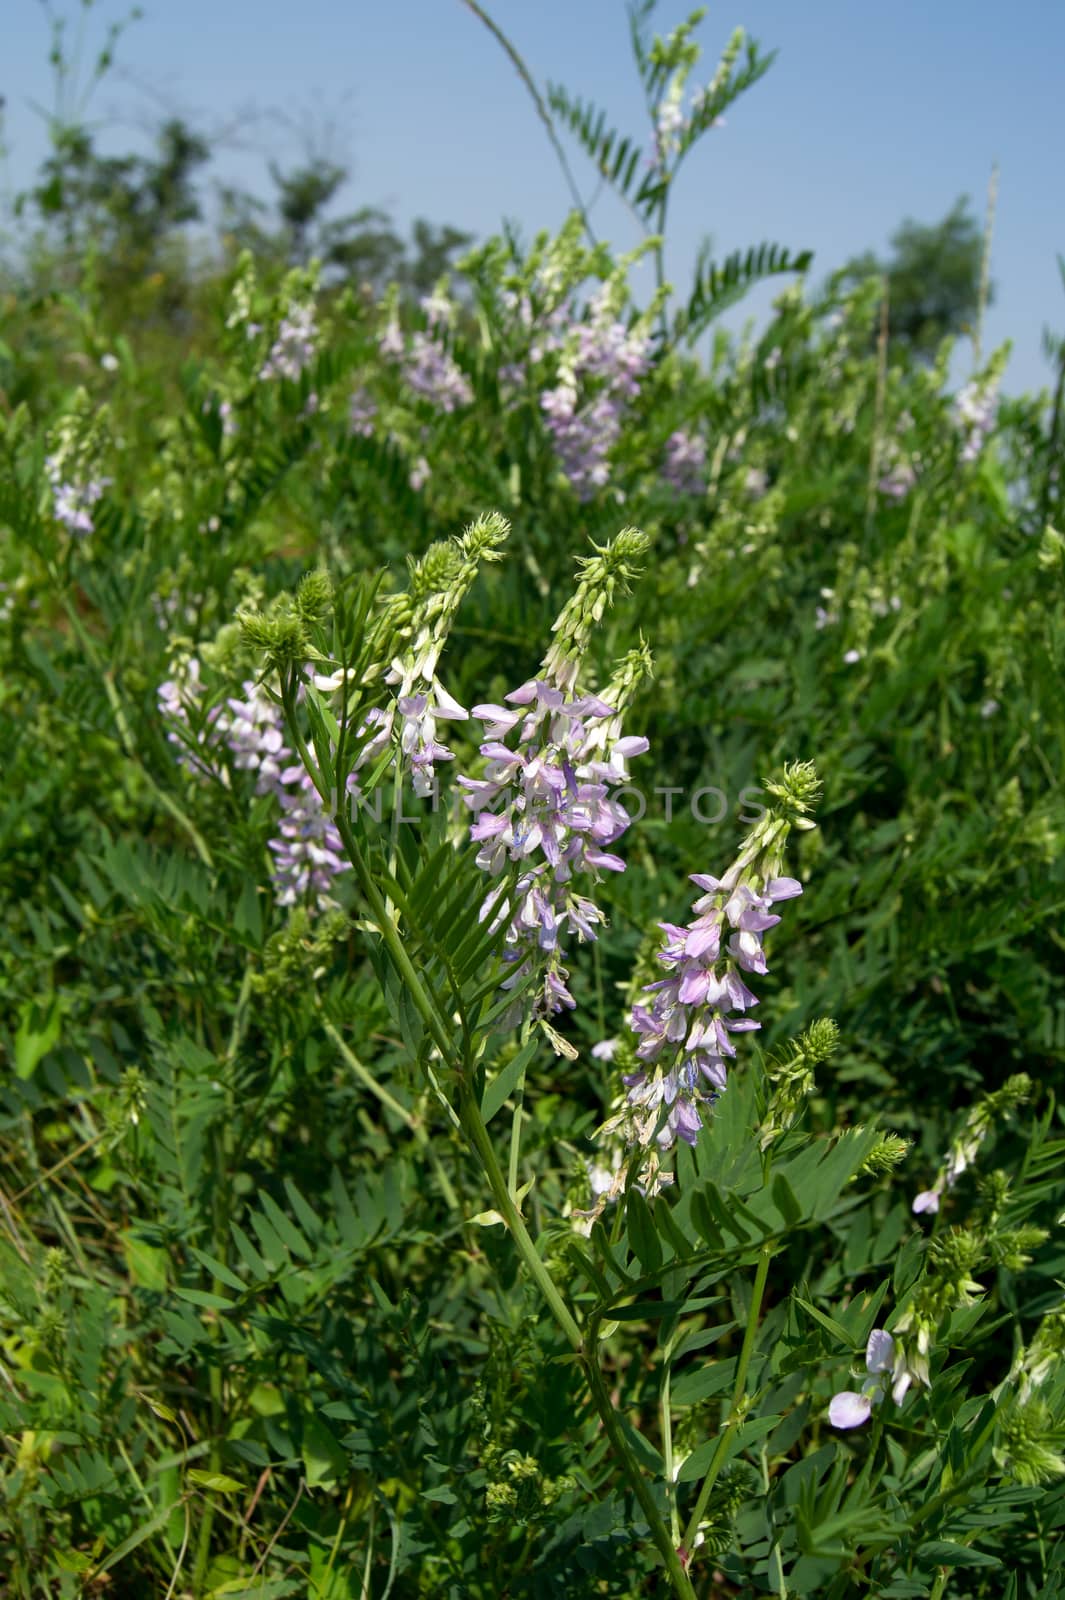 The spring vetch (Vicia sativa L.) field weed and feed crops.